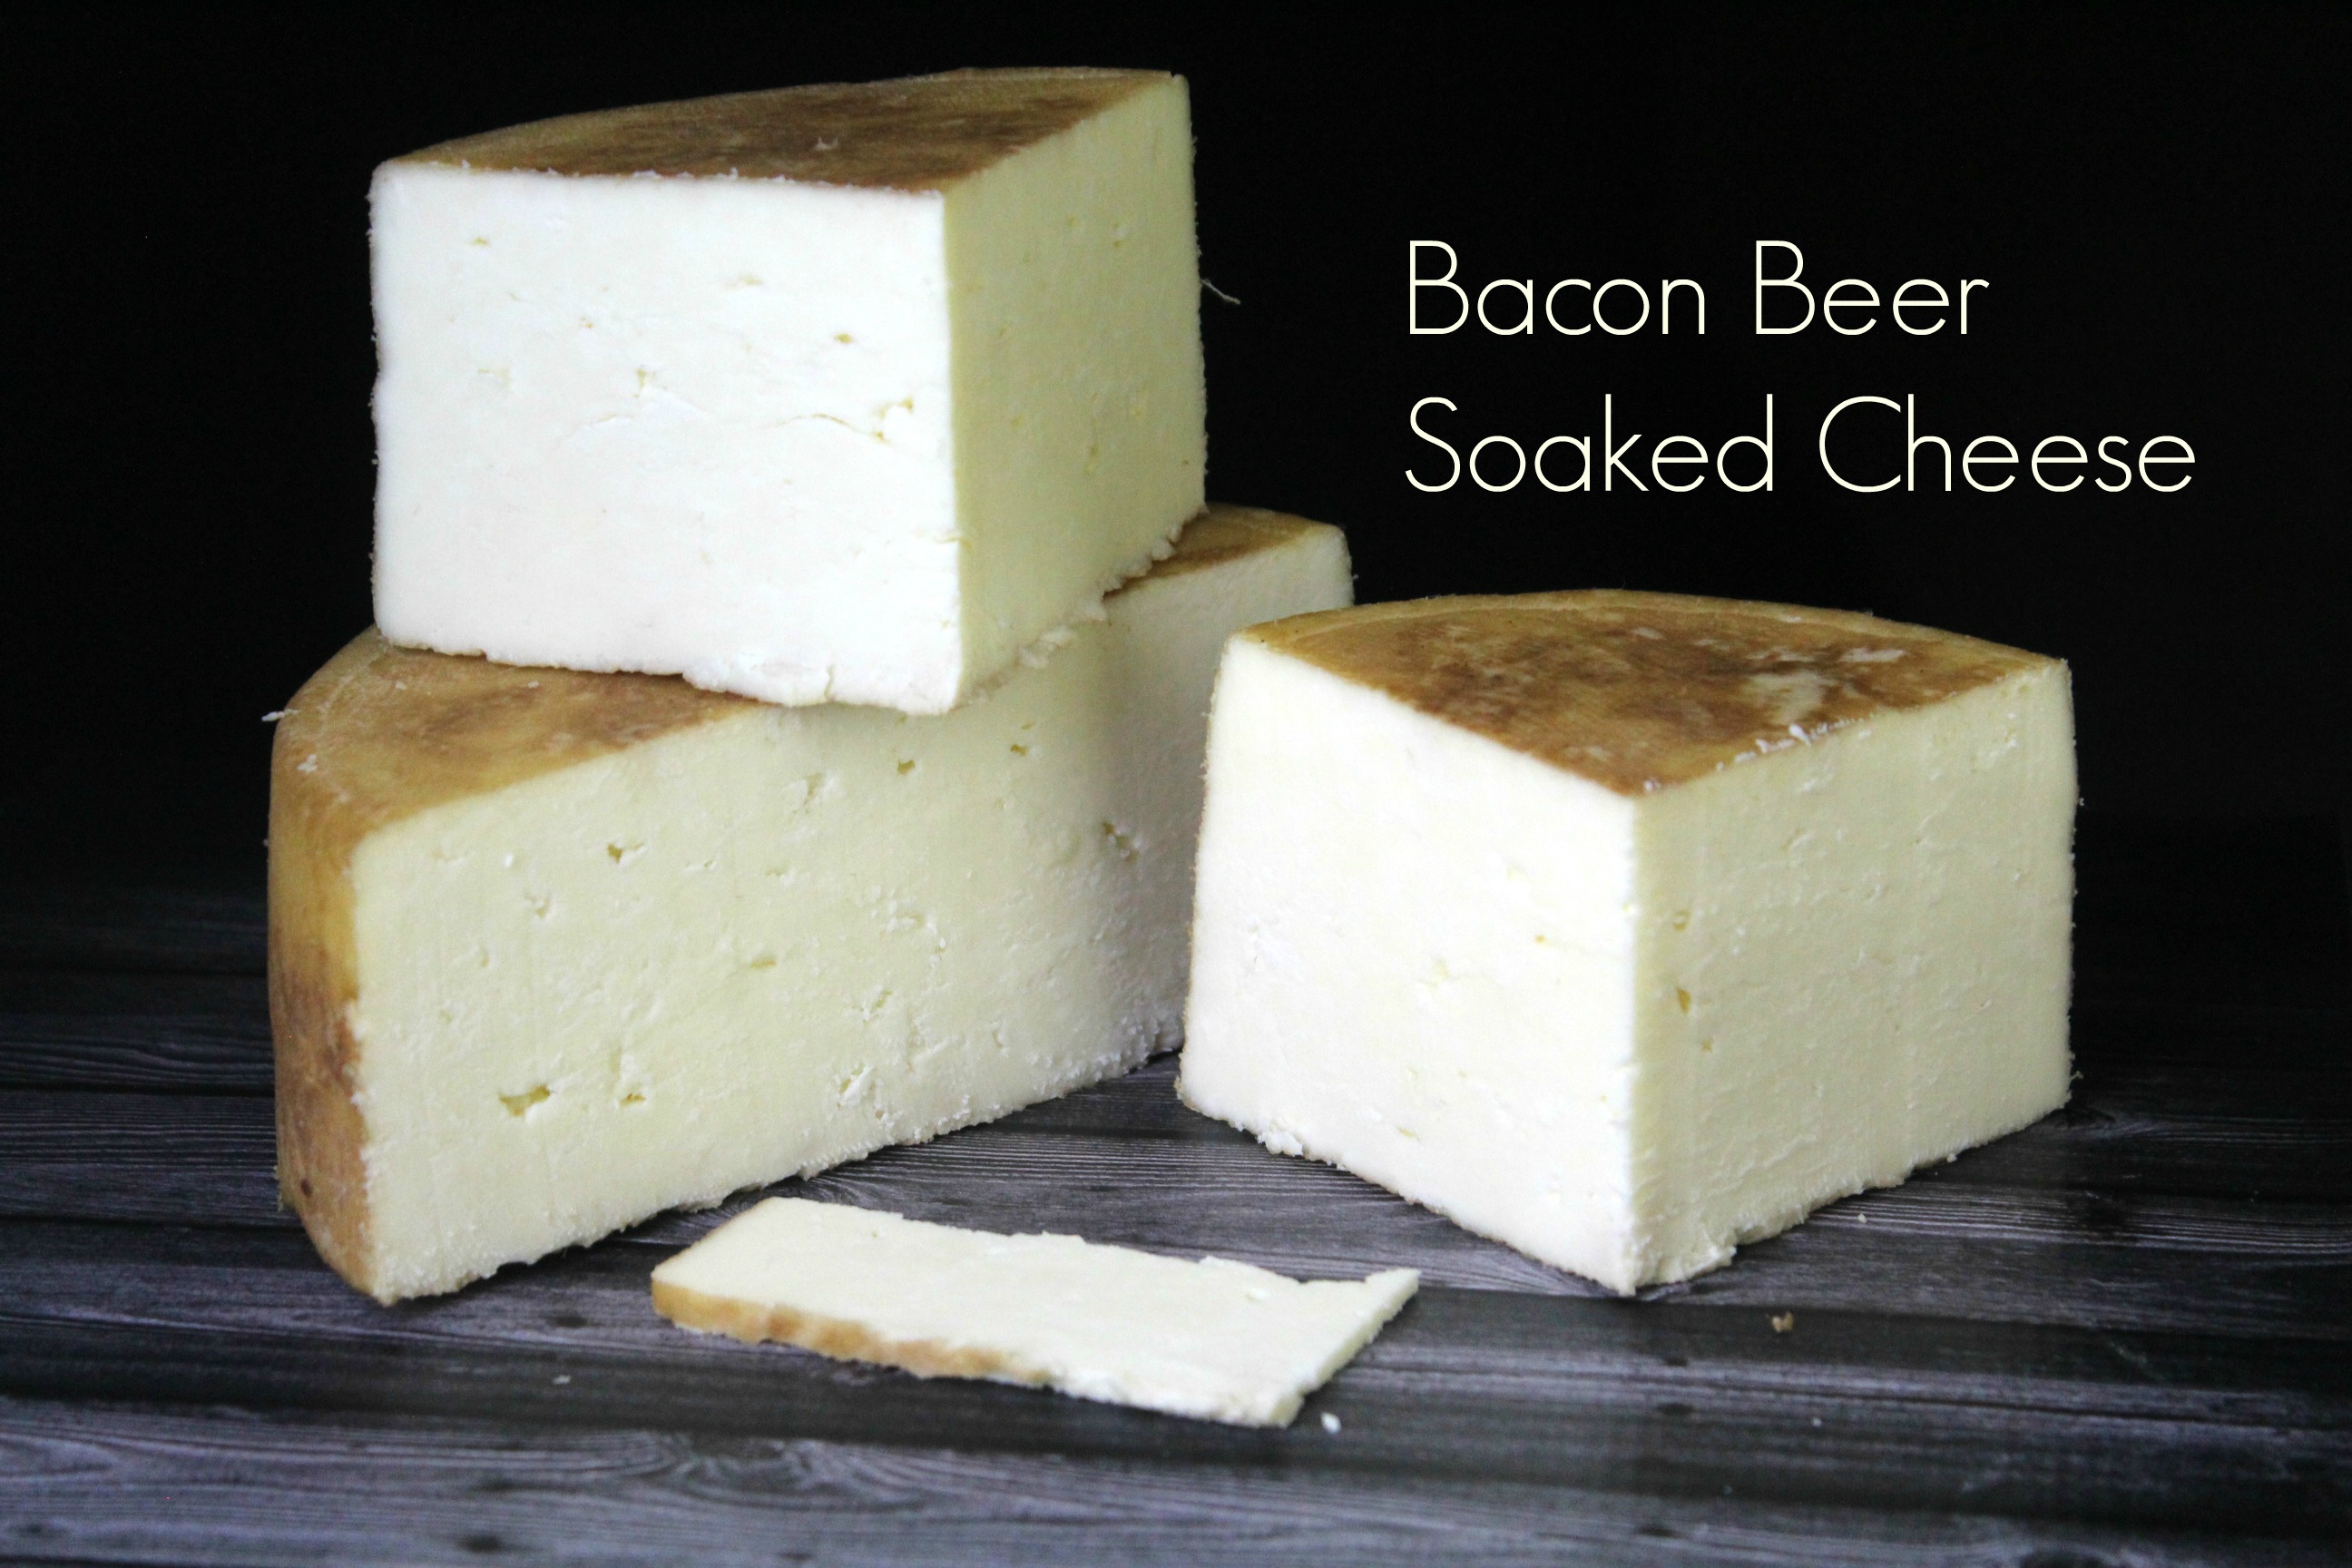 Bacon beer soaked cheese - such a flavorful and rich infusion to a fresh wheel of your favorite creamy Jack cheese, taking it to new levels!